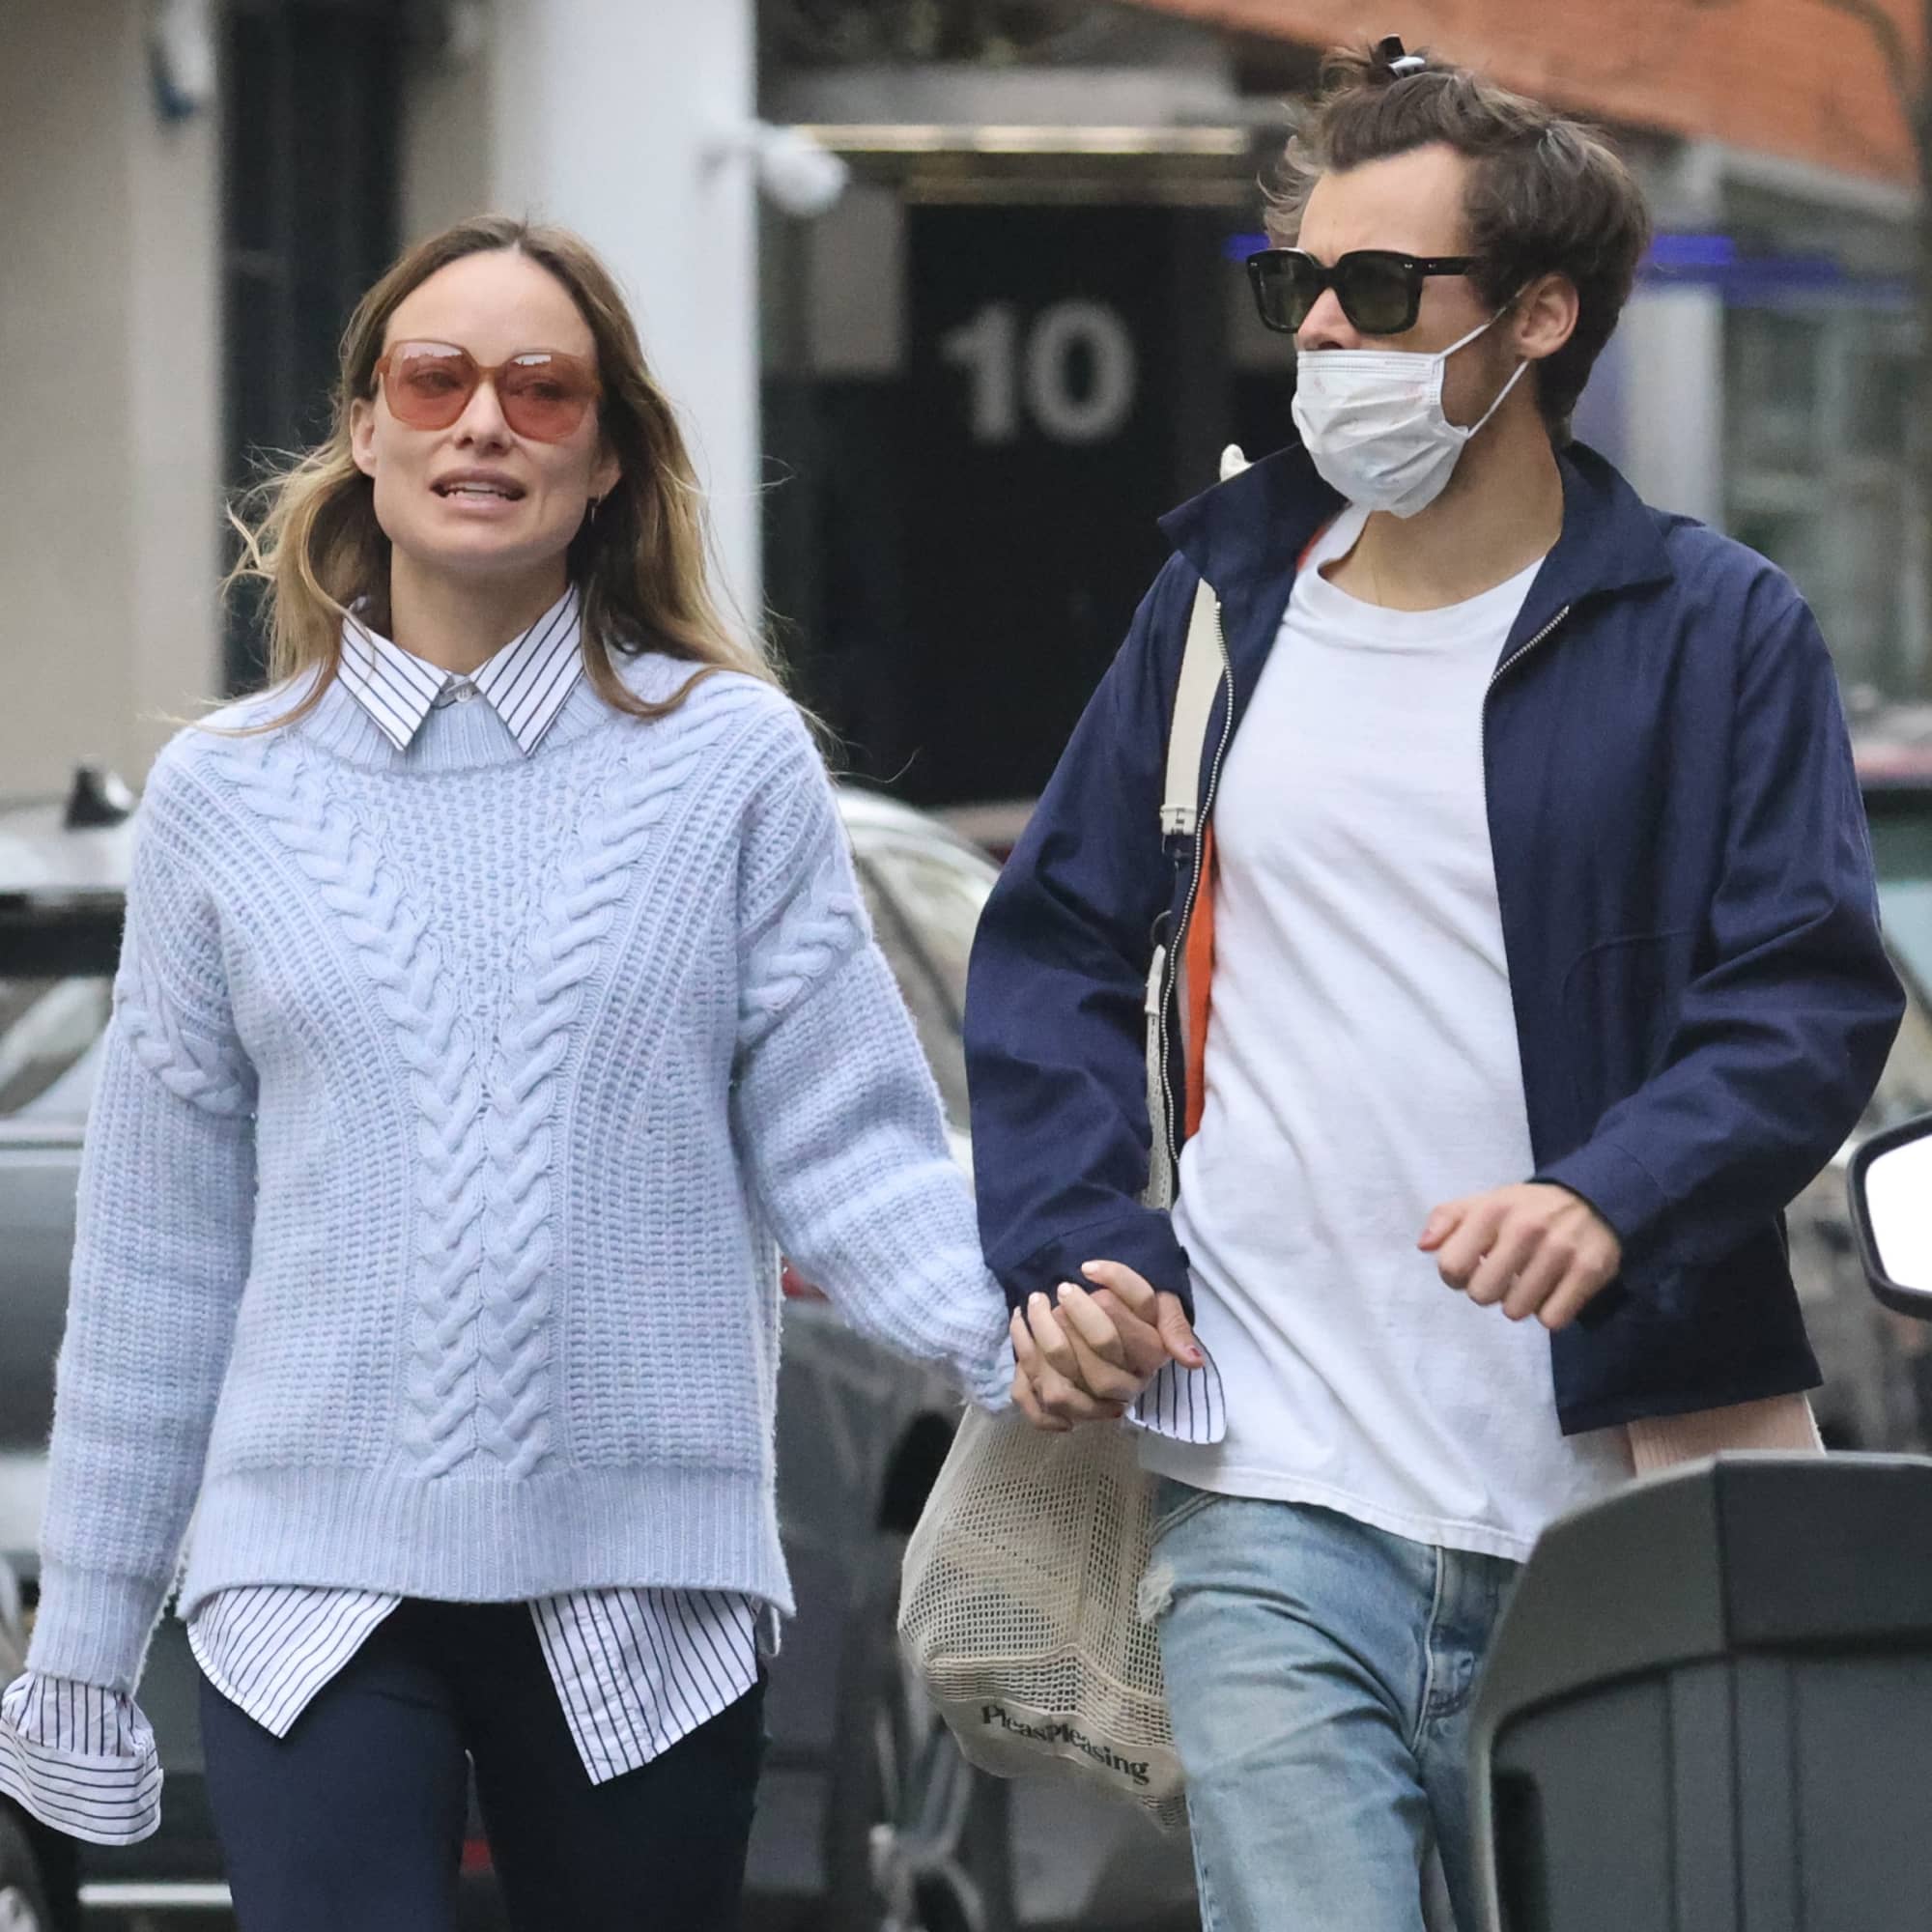 Harry Styles And Olivia Wilde Spotted On A Romantic Stroll In London